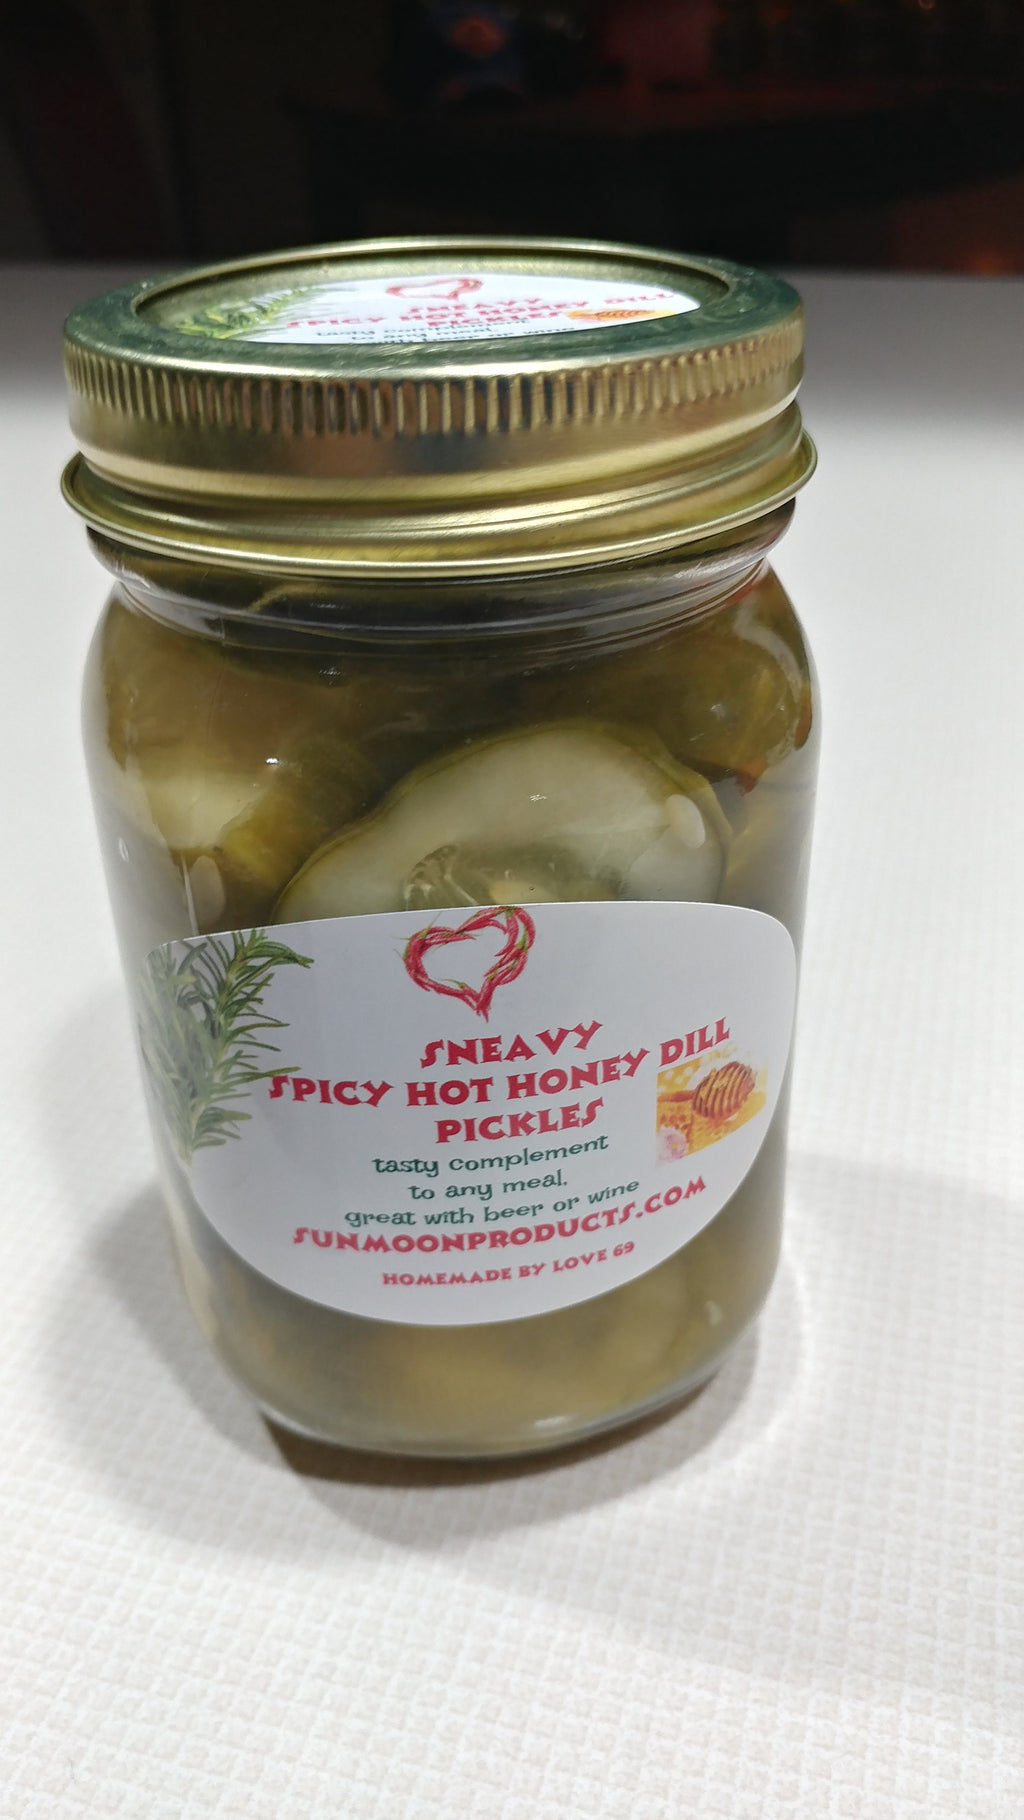 Sneavy Spicy Hot Honey Dill Pickles 1 Pint